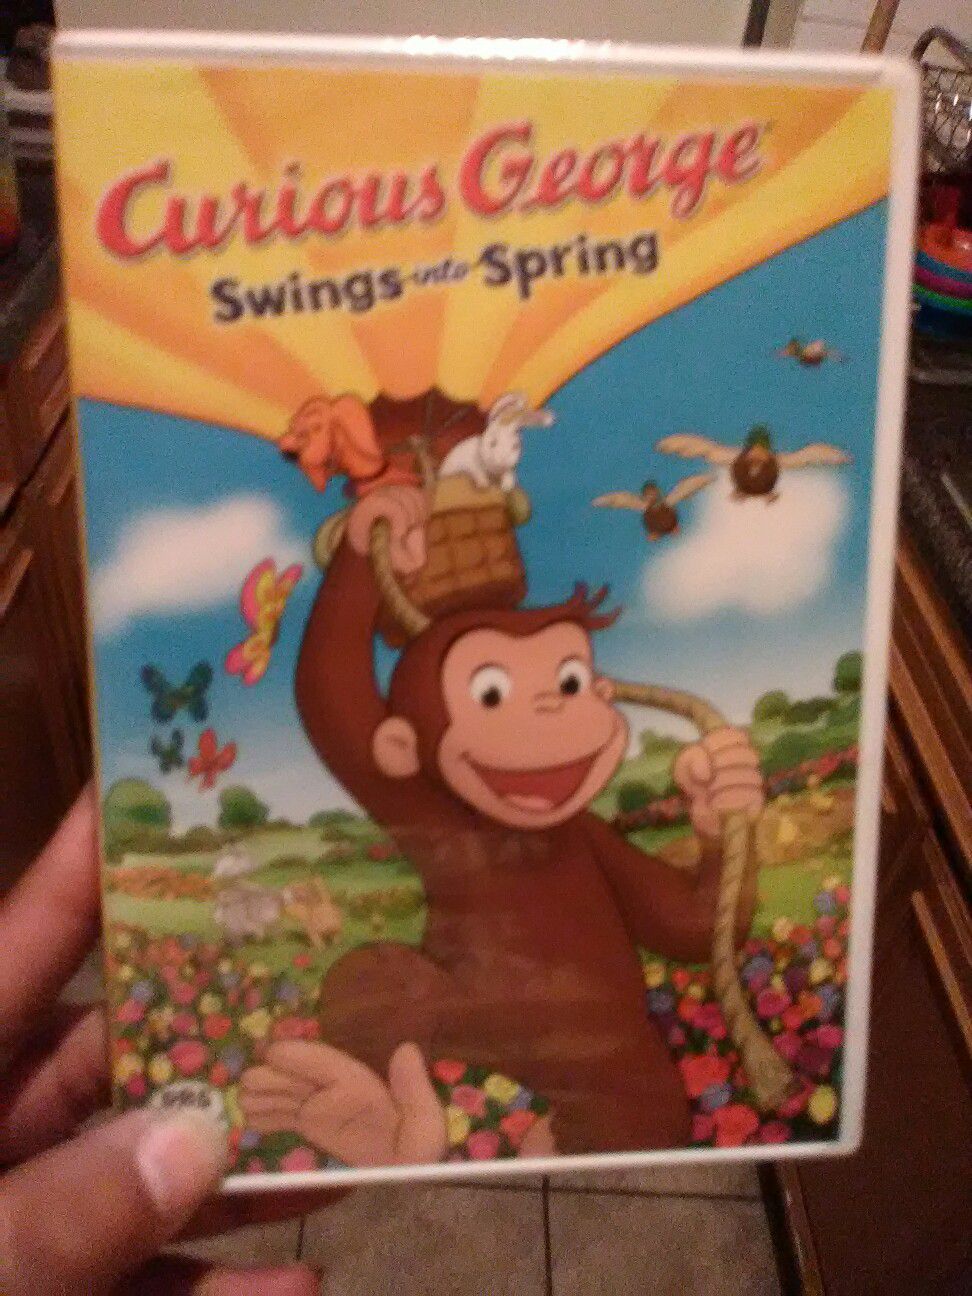 Curious George Swings Into Spring DVD